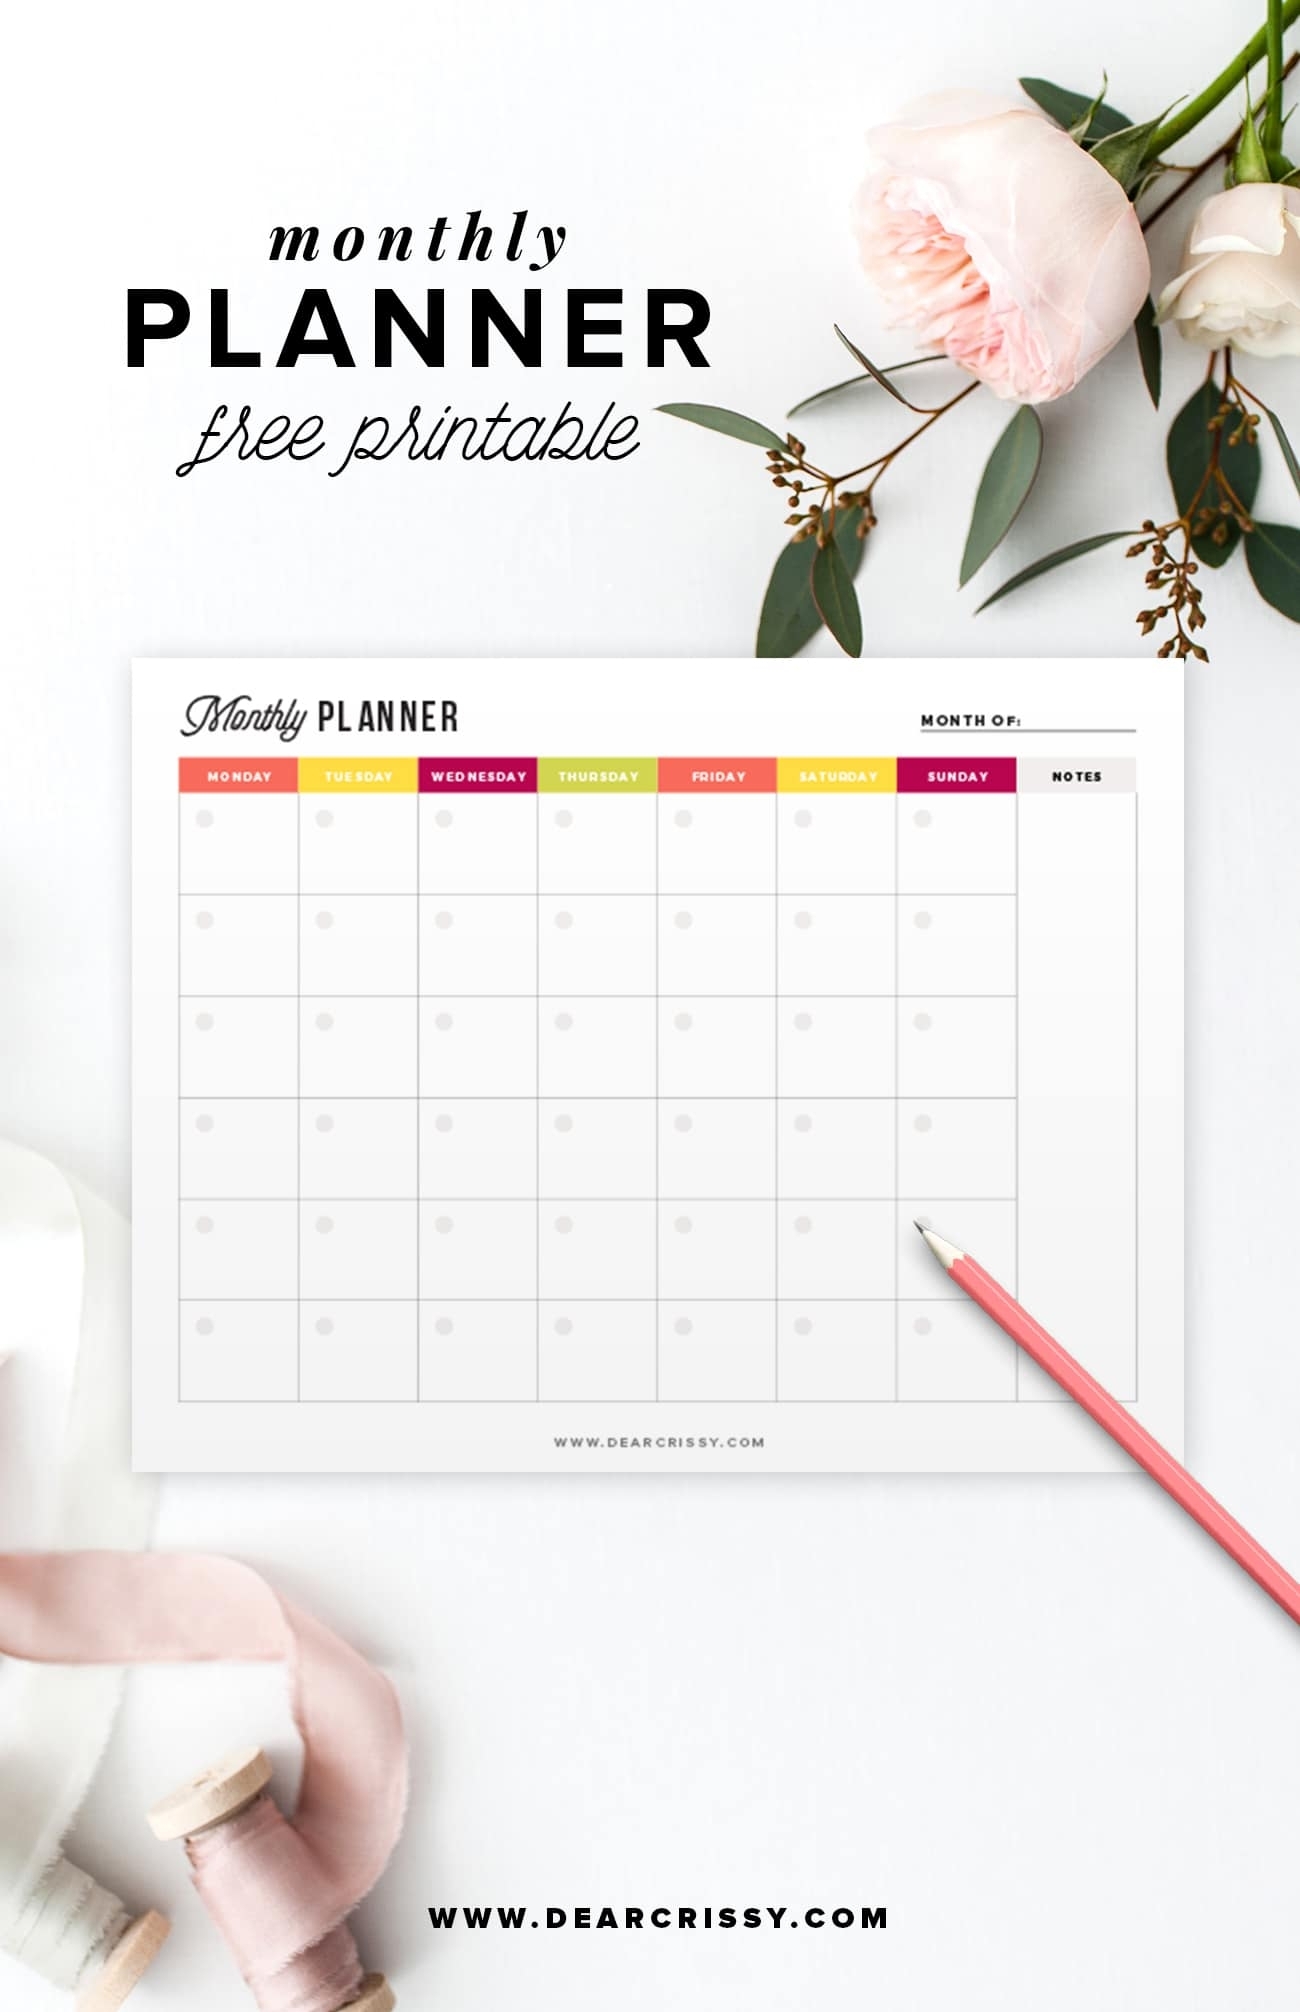 Free Printable Monthly Planner - Start Planning Your Month Today! for Undated Printable Monthly Calendar Free